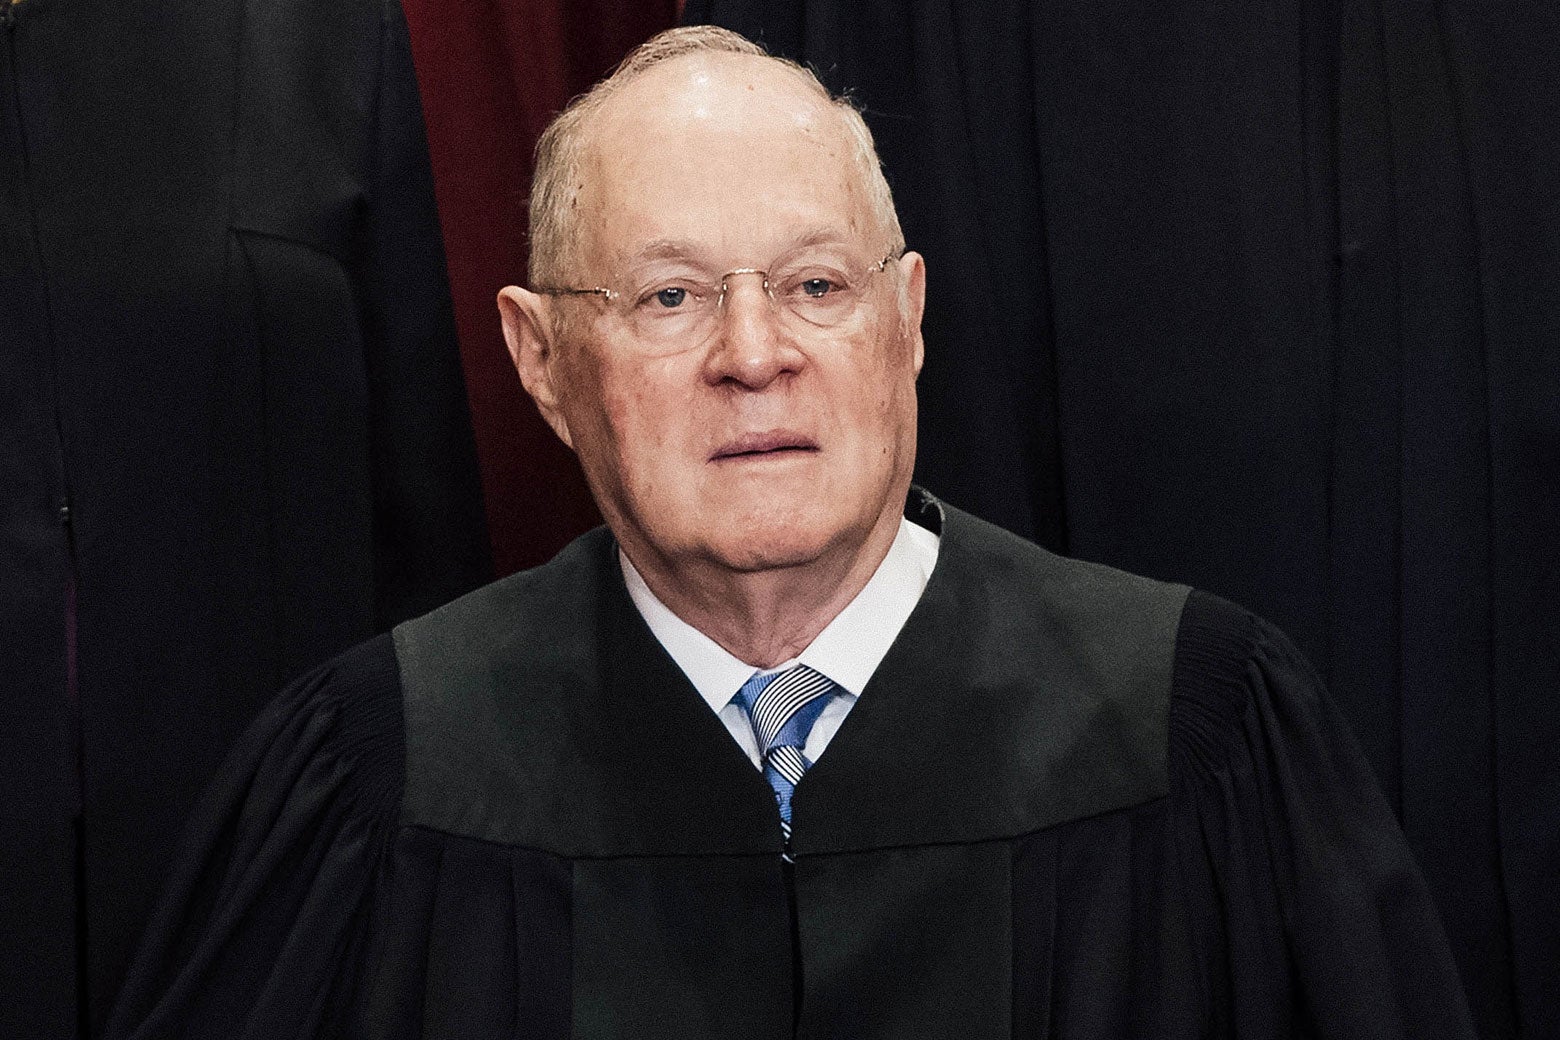 Anthony Kennedy in a black robe.